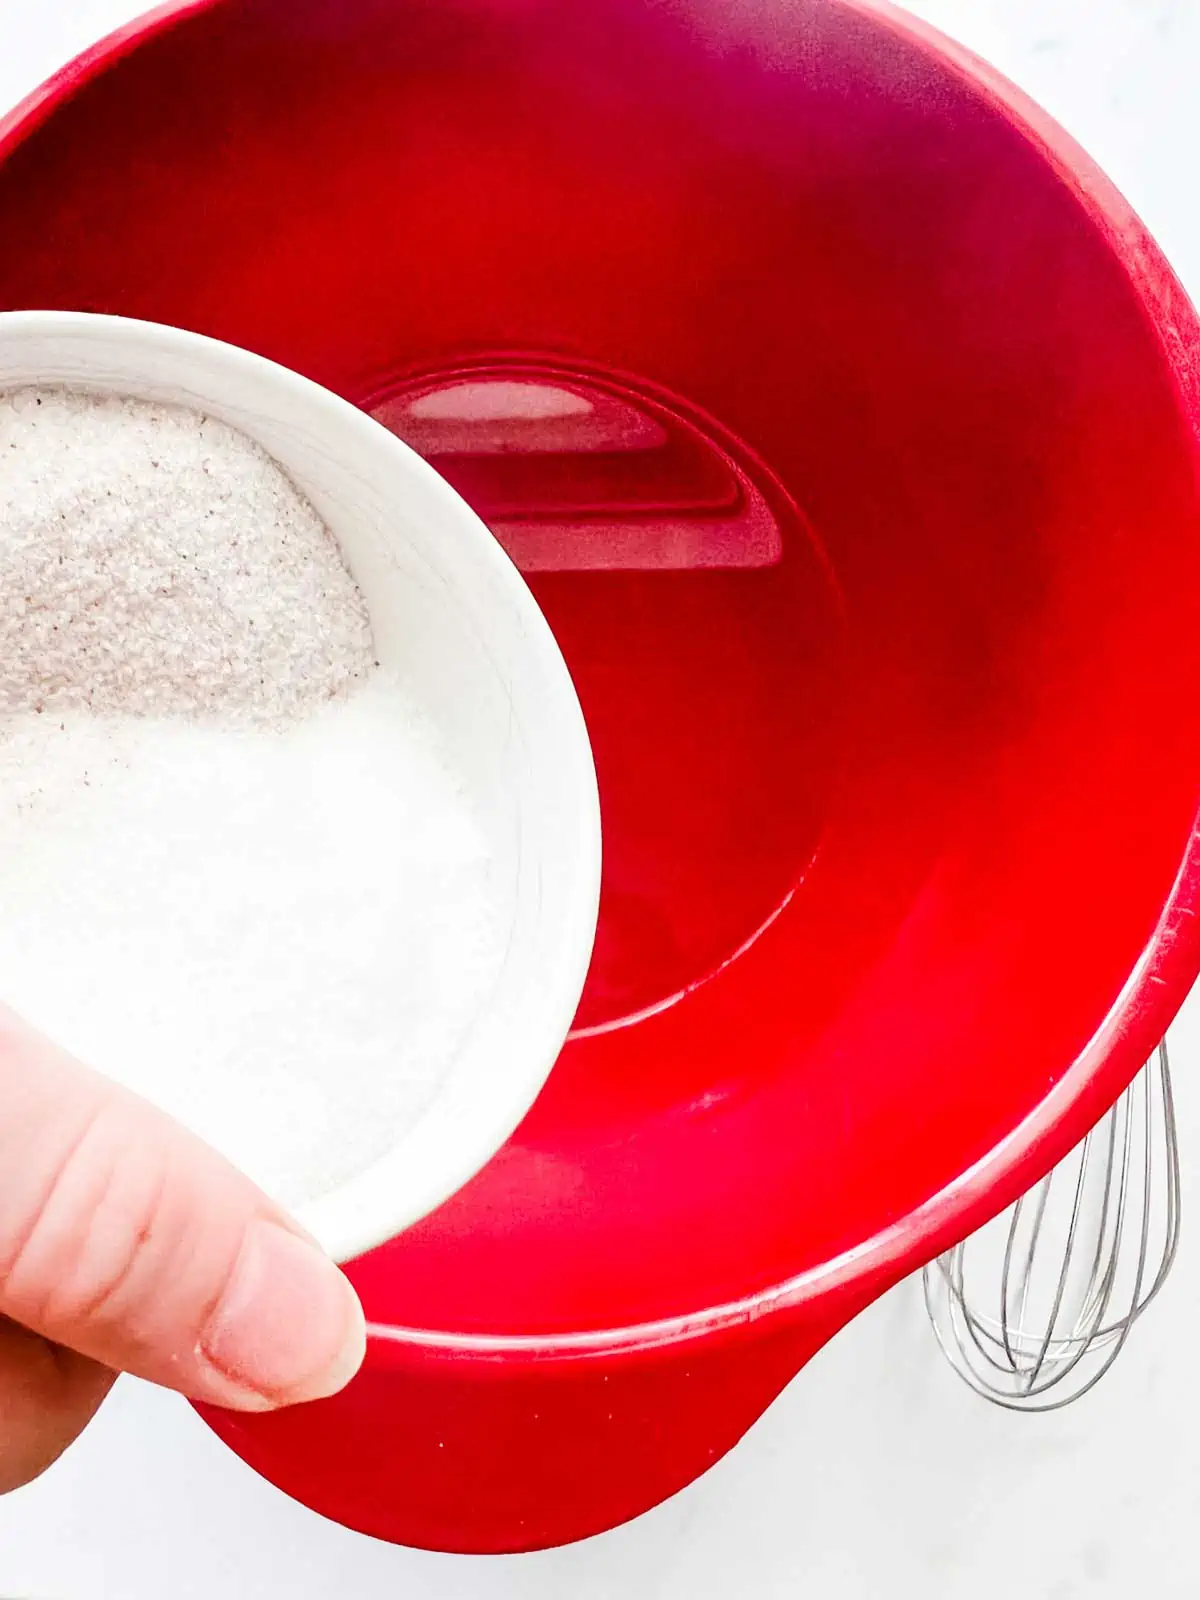 Photo of salt and sugar being poured into a red bowl of water.